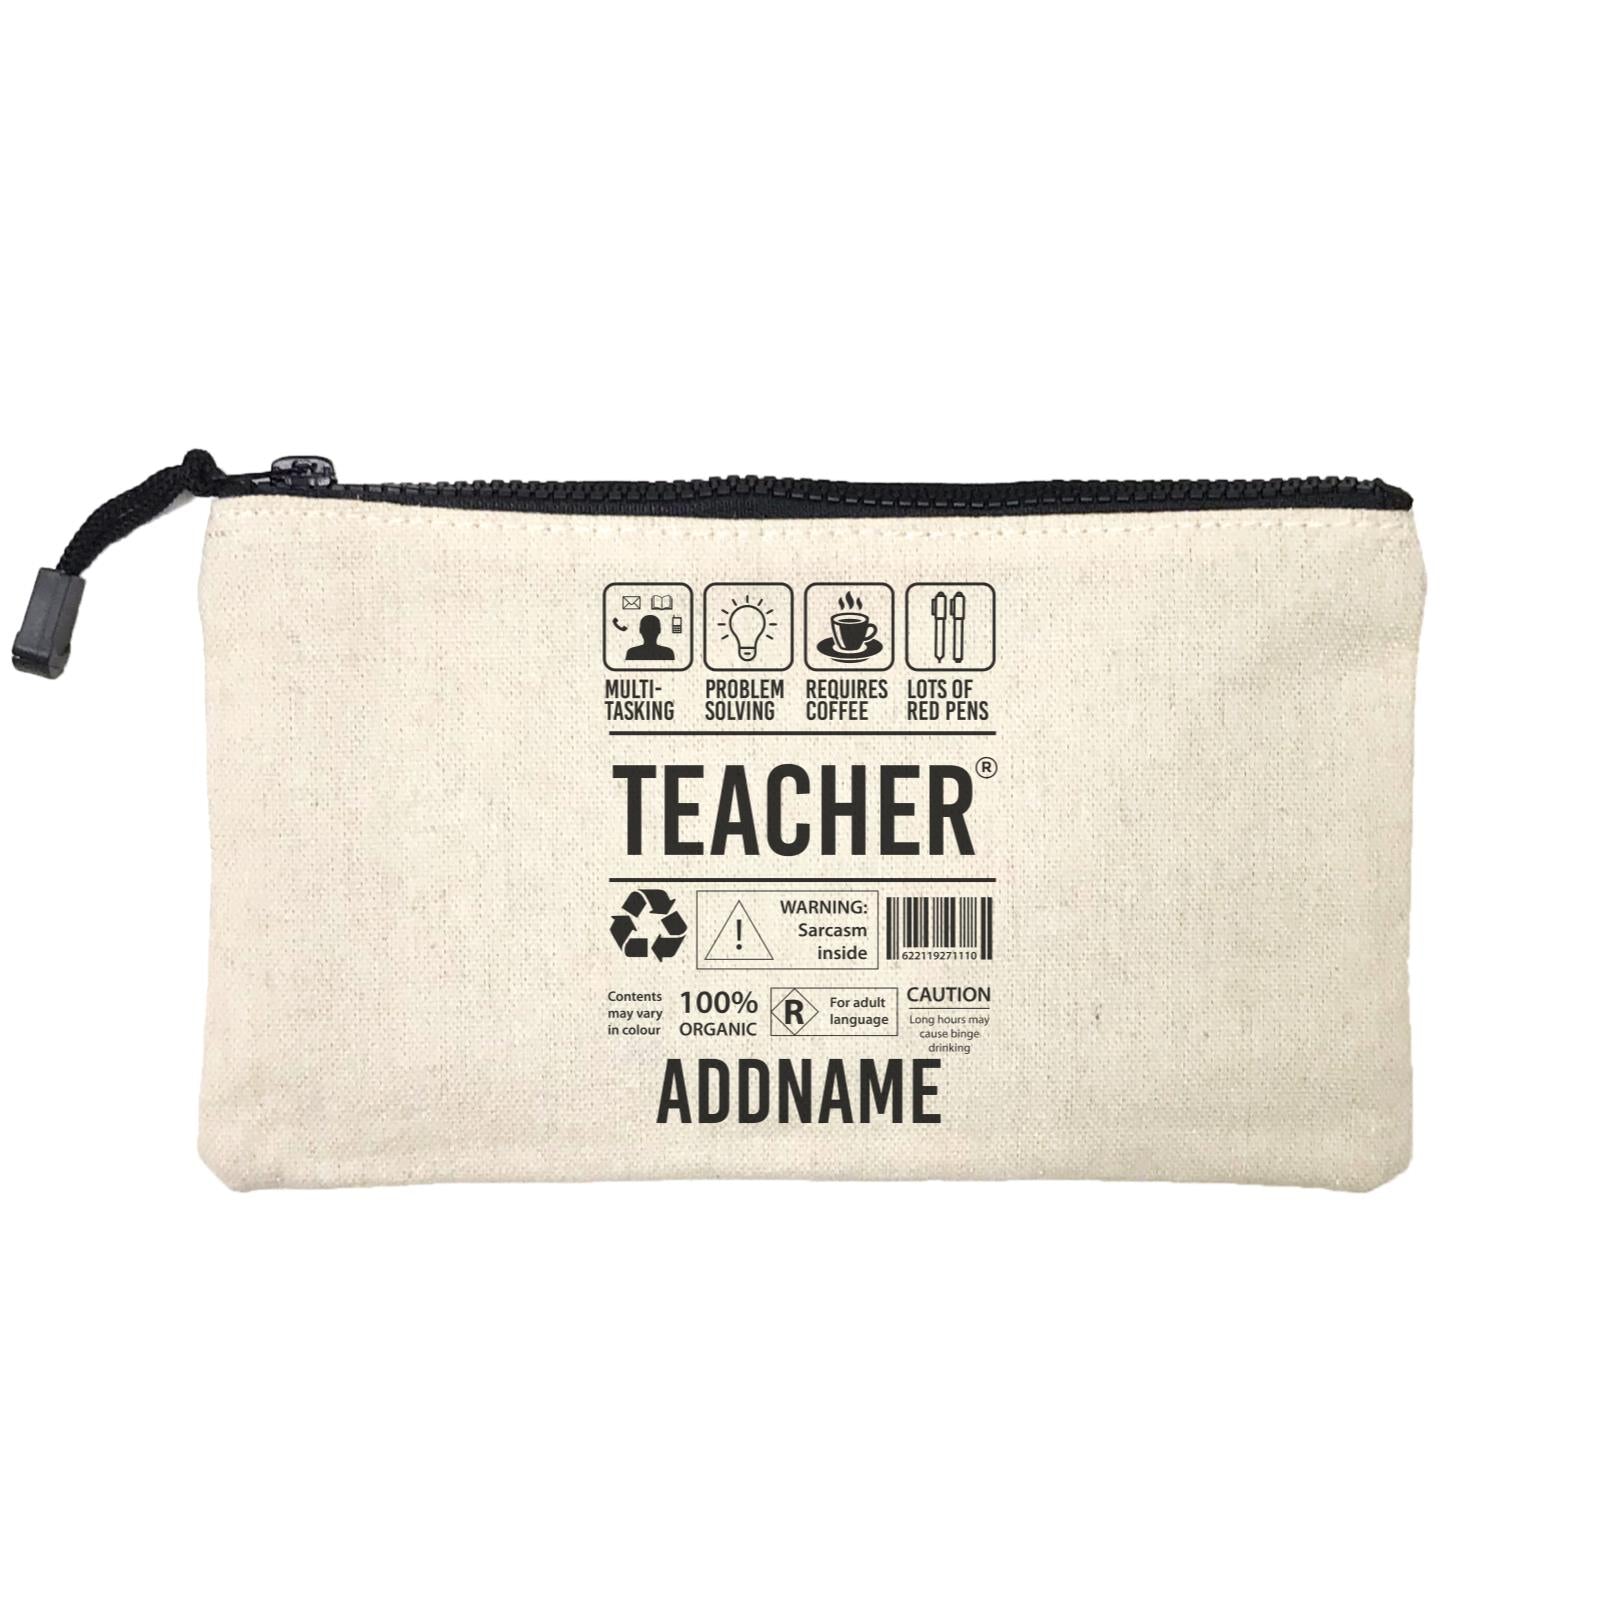 Typography Series - Teacher Infographic Warning Mini Accessories Stationery Pouch